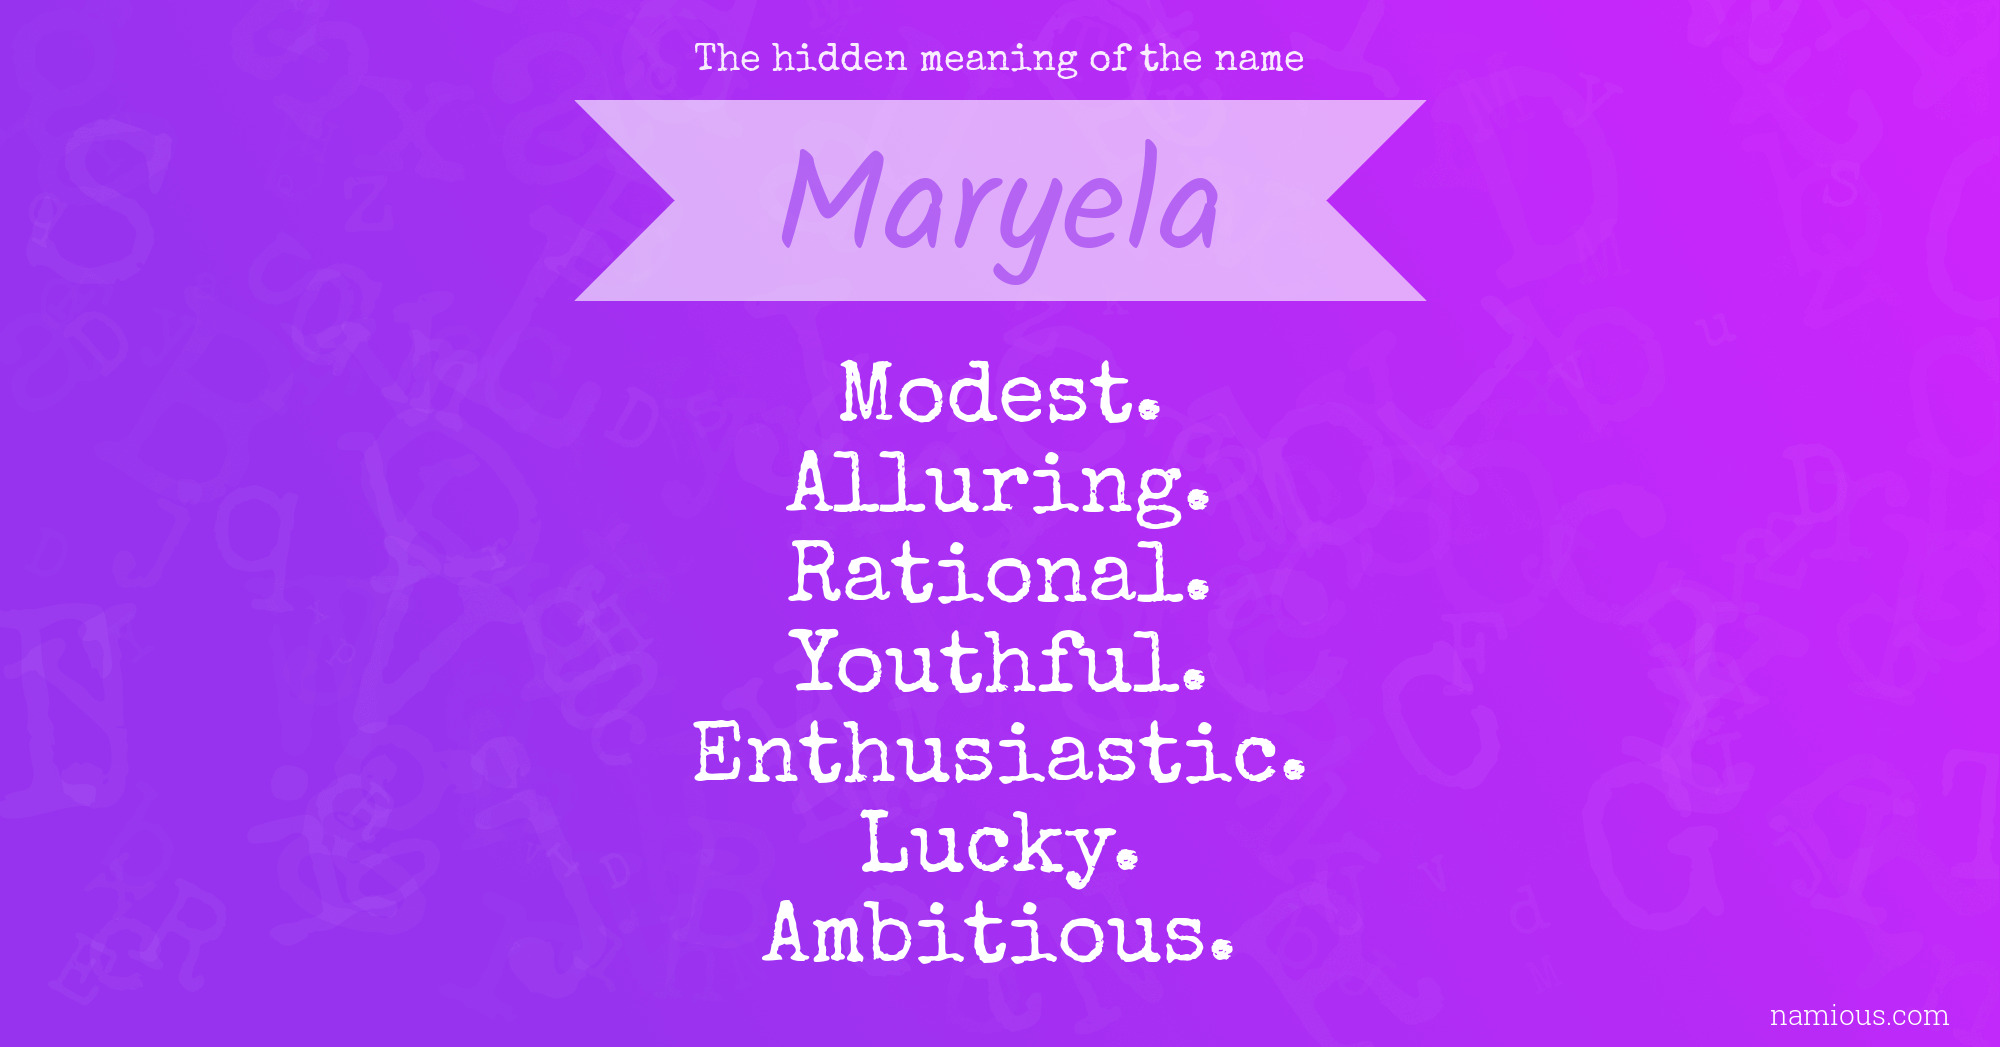 The hidden meaning of the name Maryela